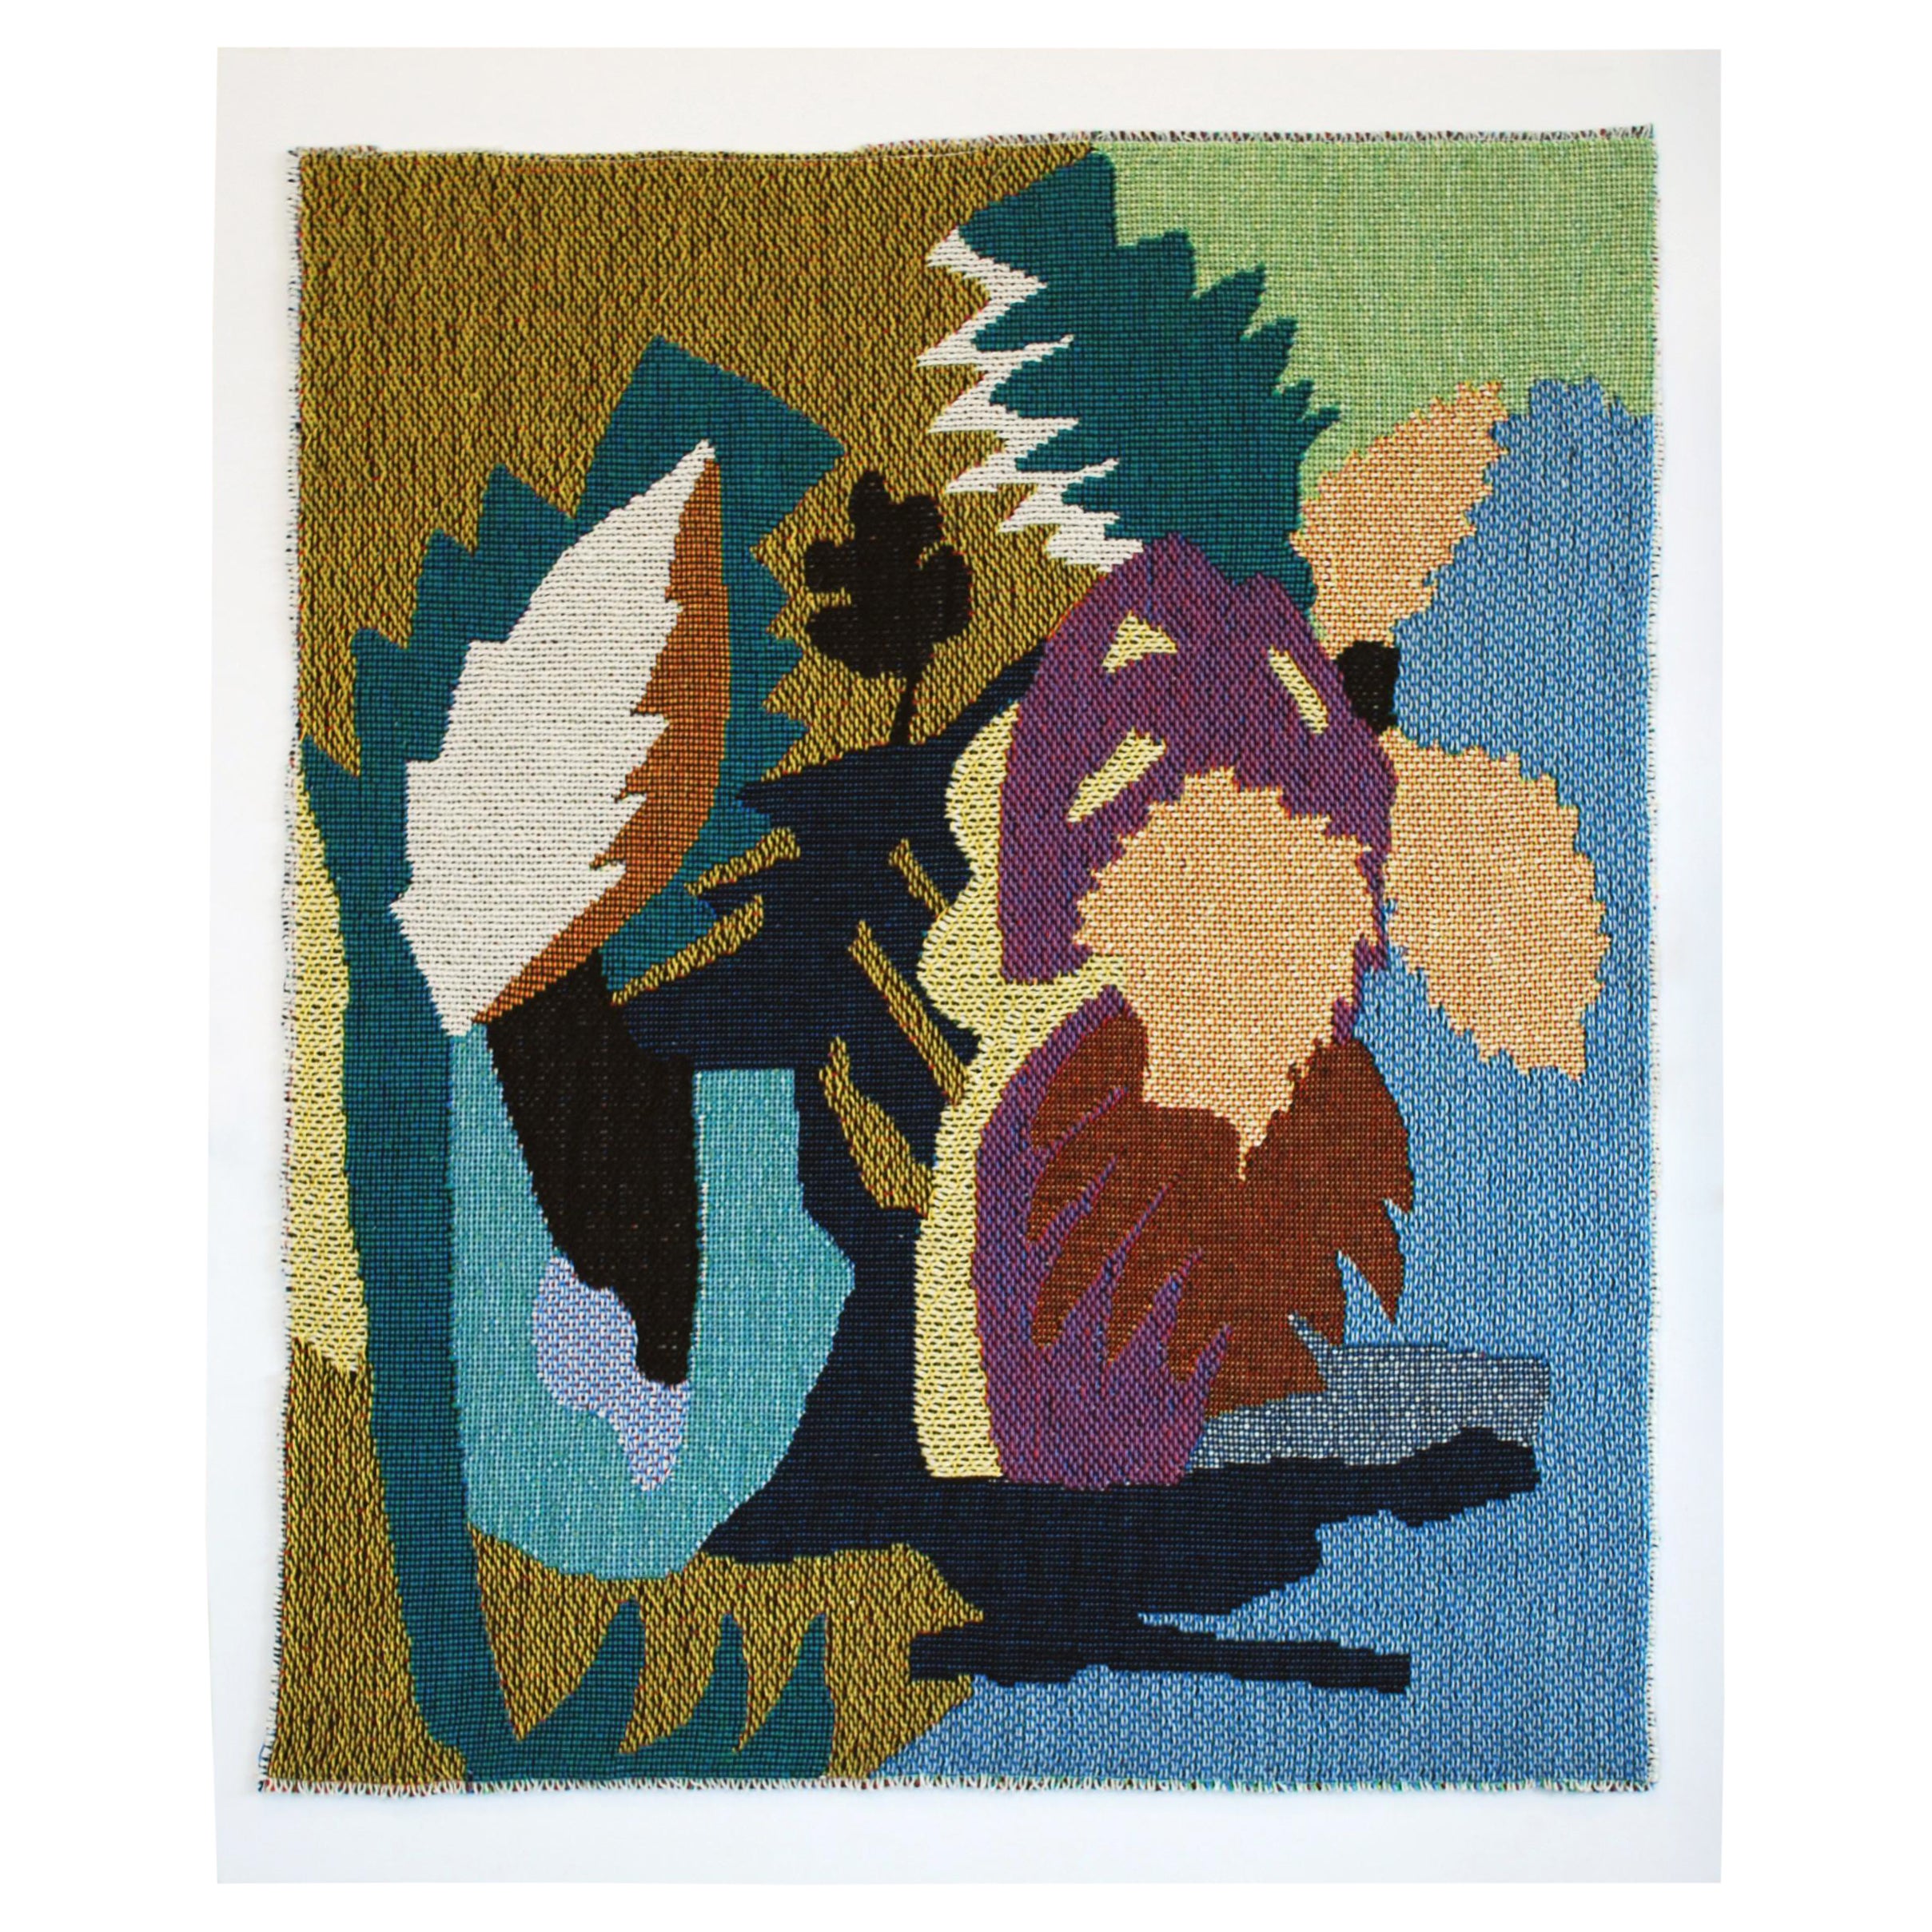 Abstract Nature Study Woven Wall Hanging Tapestry Artwork